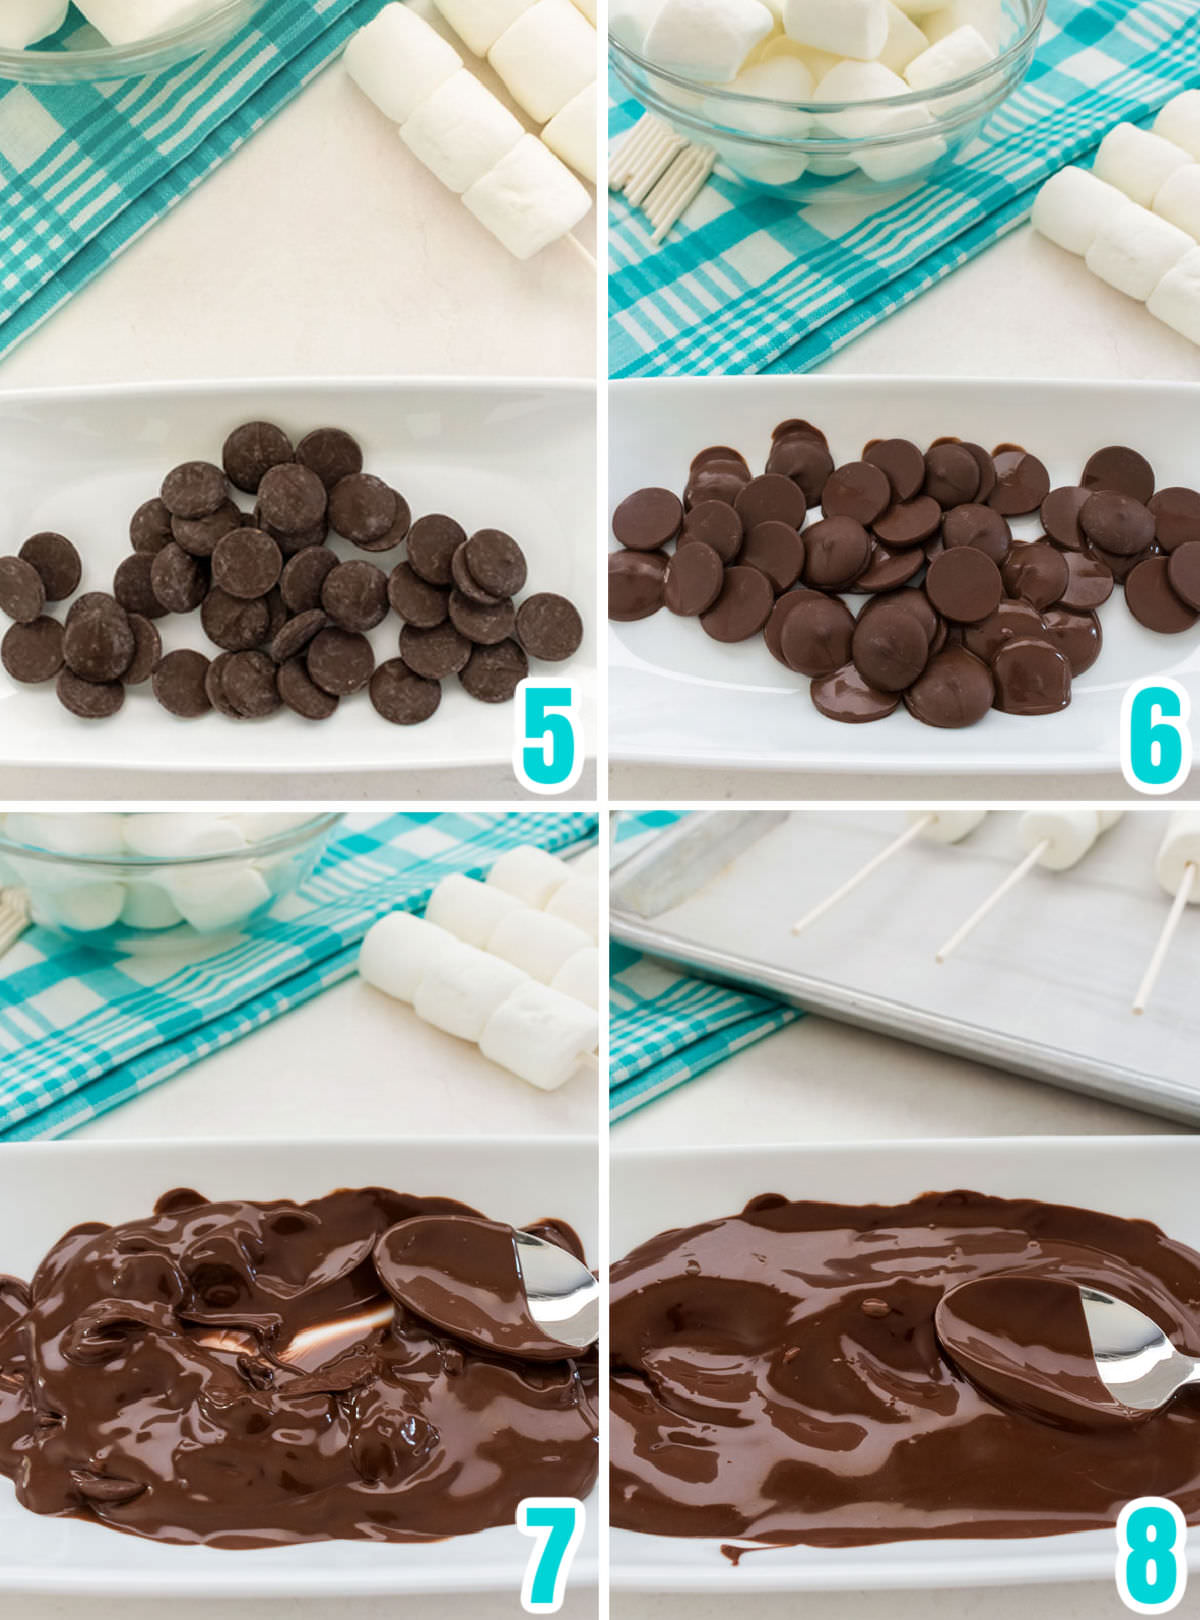 Collage image showing the steps for melting the chocolate to get ready to cover the marshmallows.